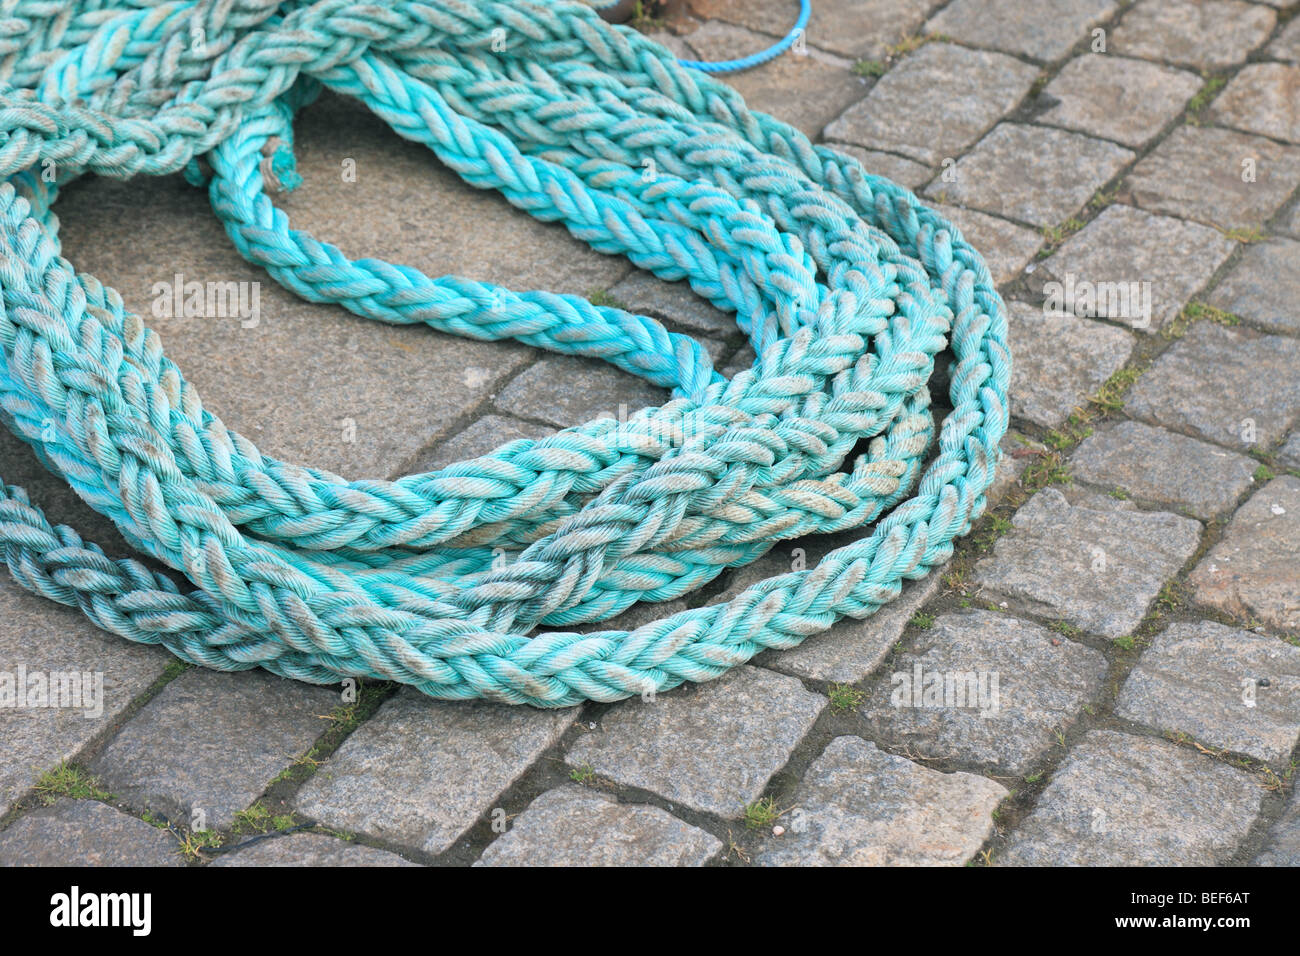 Blue twisted rope on pavement. Stock Photo